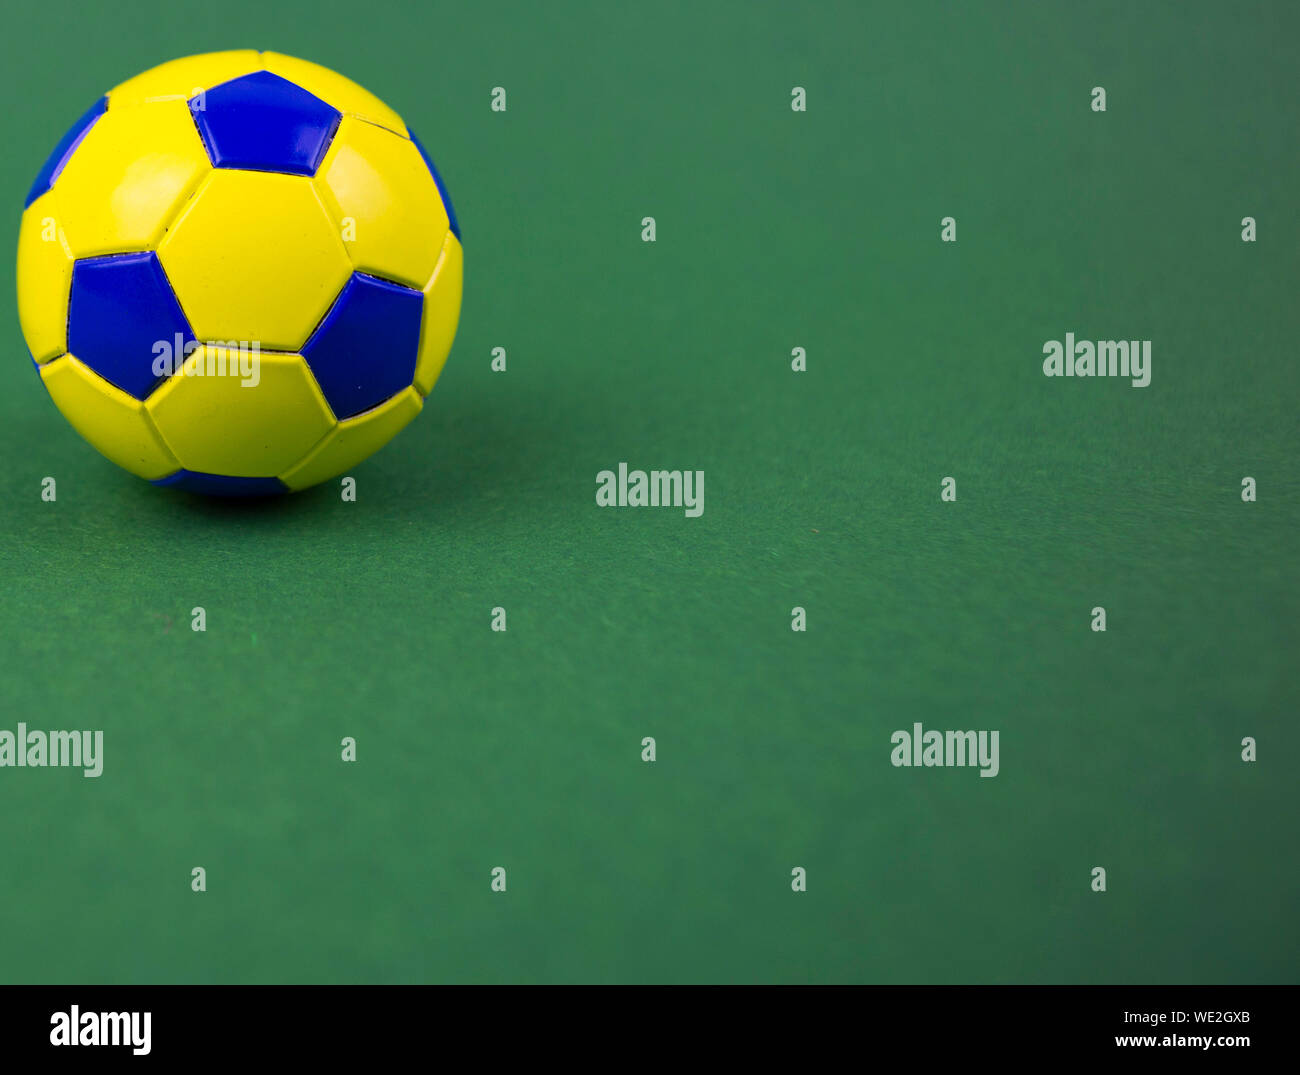 soccer ball on a green background, yellow-blue diamonds, with space for ...